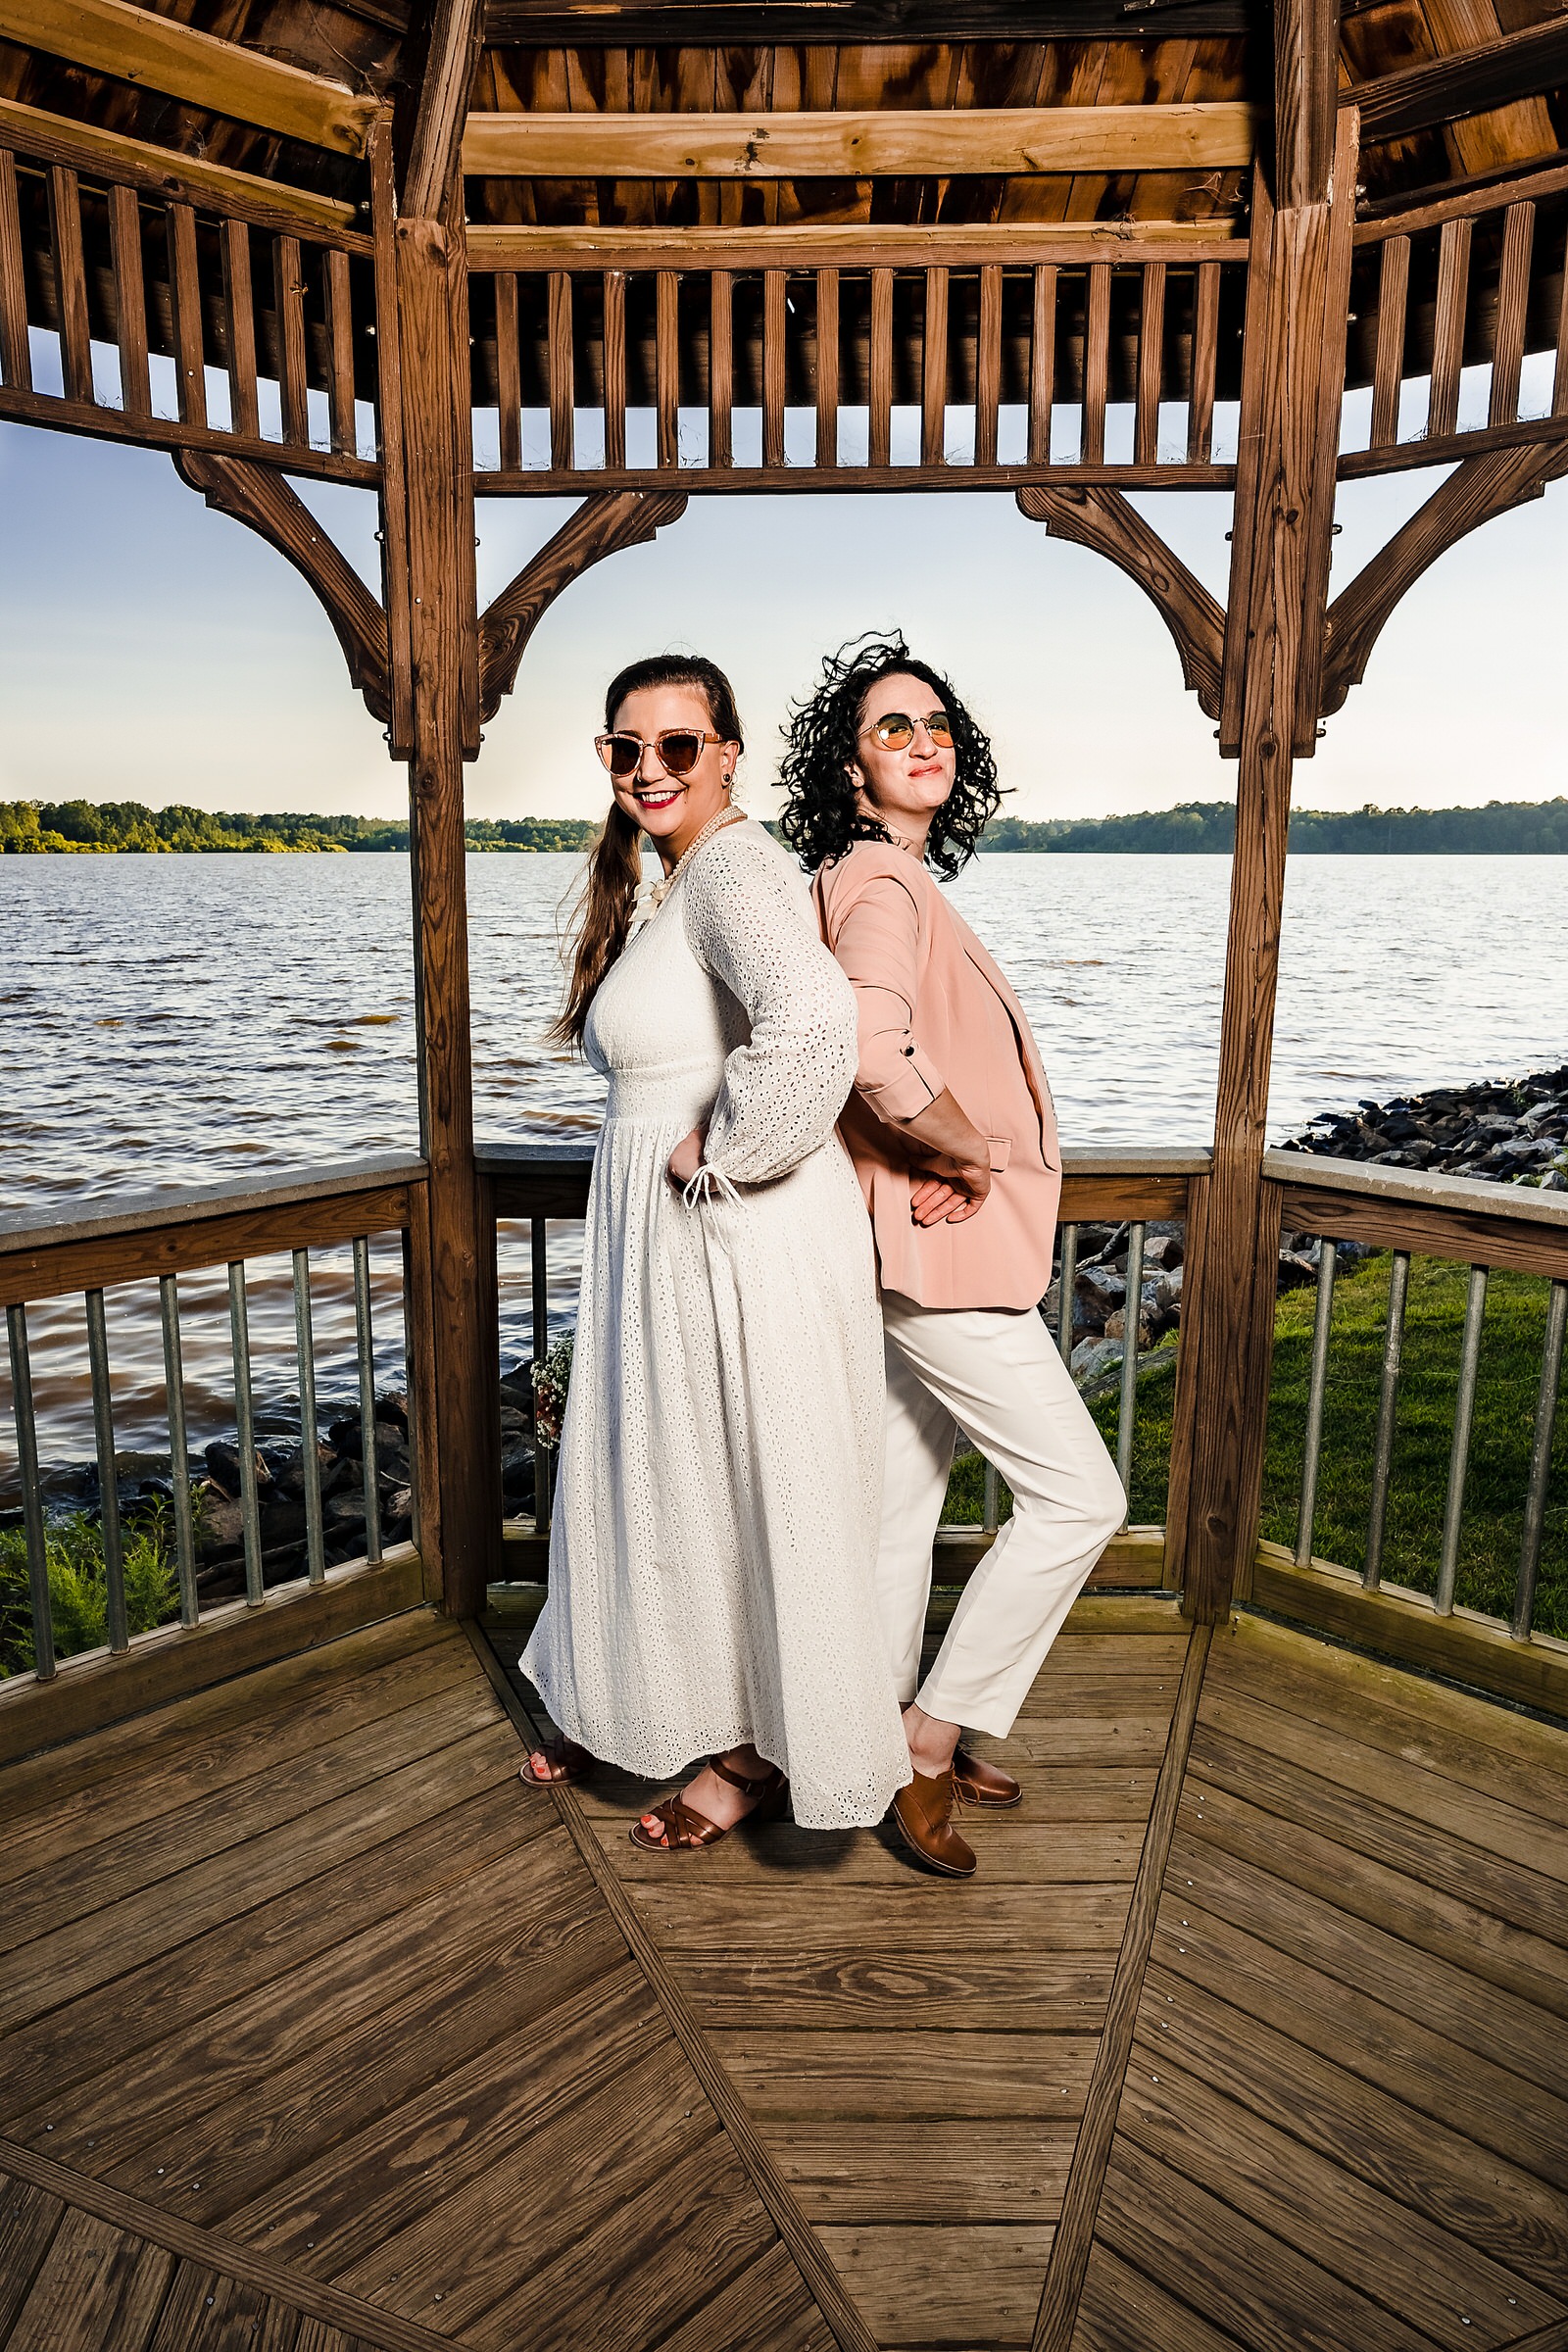 Two brides pose in fashionable outfits and sunglasses on their wedding day. 